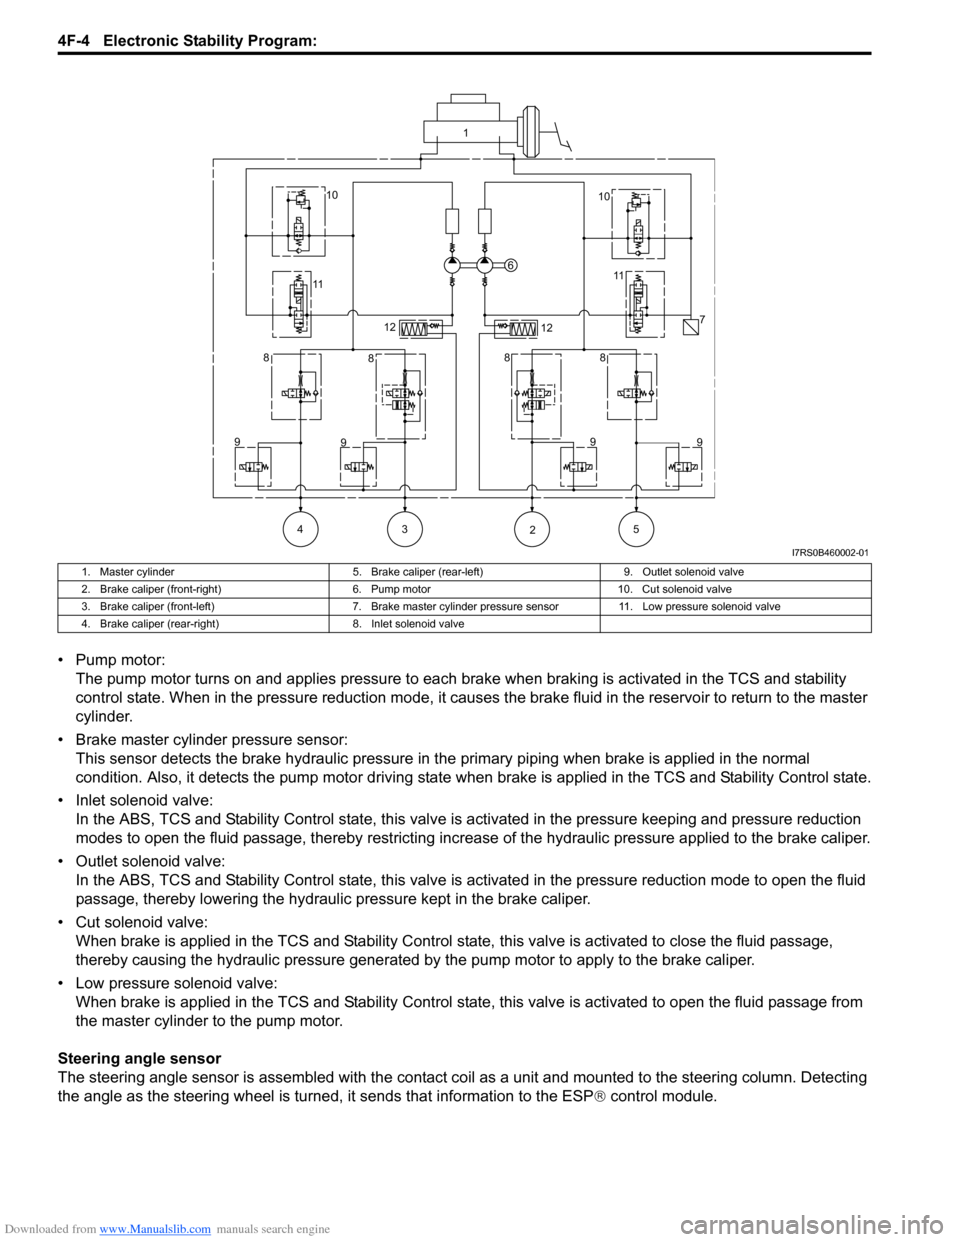 SUZUKI SWIFT 2008 2.G Service Workshop Manual Downloaded from www.Manualslib.com manuals search engine 4F-4 Electronic Stability Program: 
• Pump motor:The pump motor turns on and applies pressure to each brake when braking is activated in the 